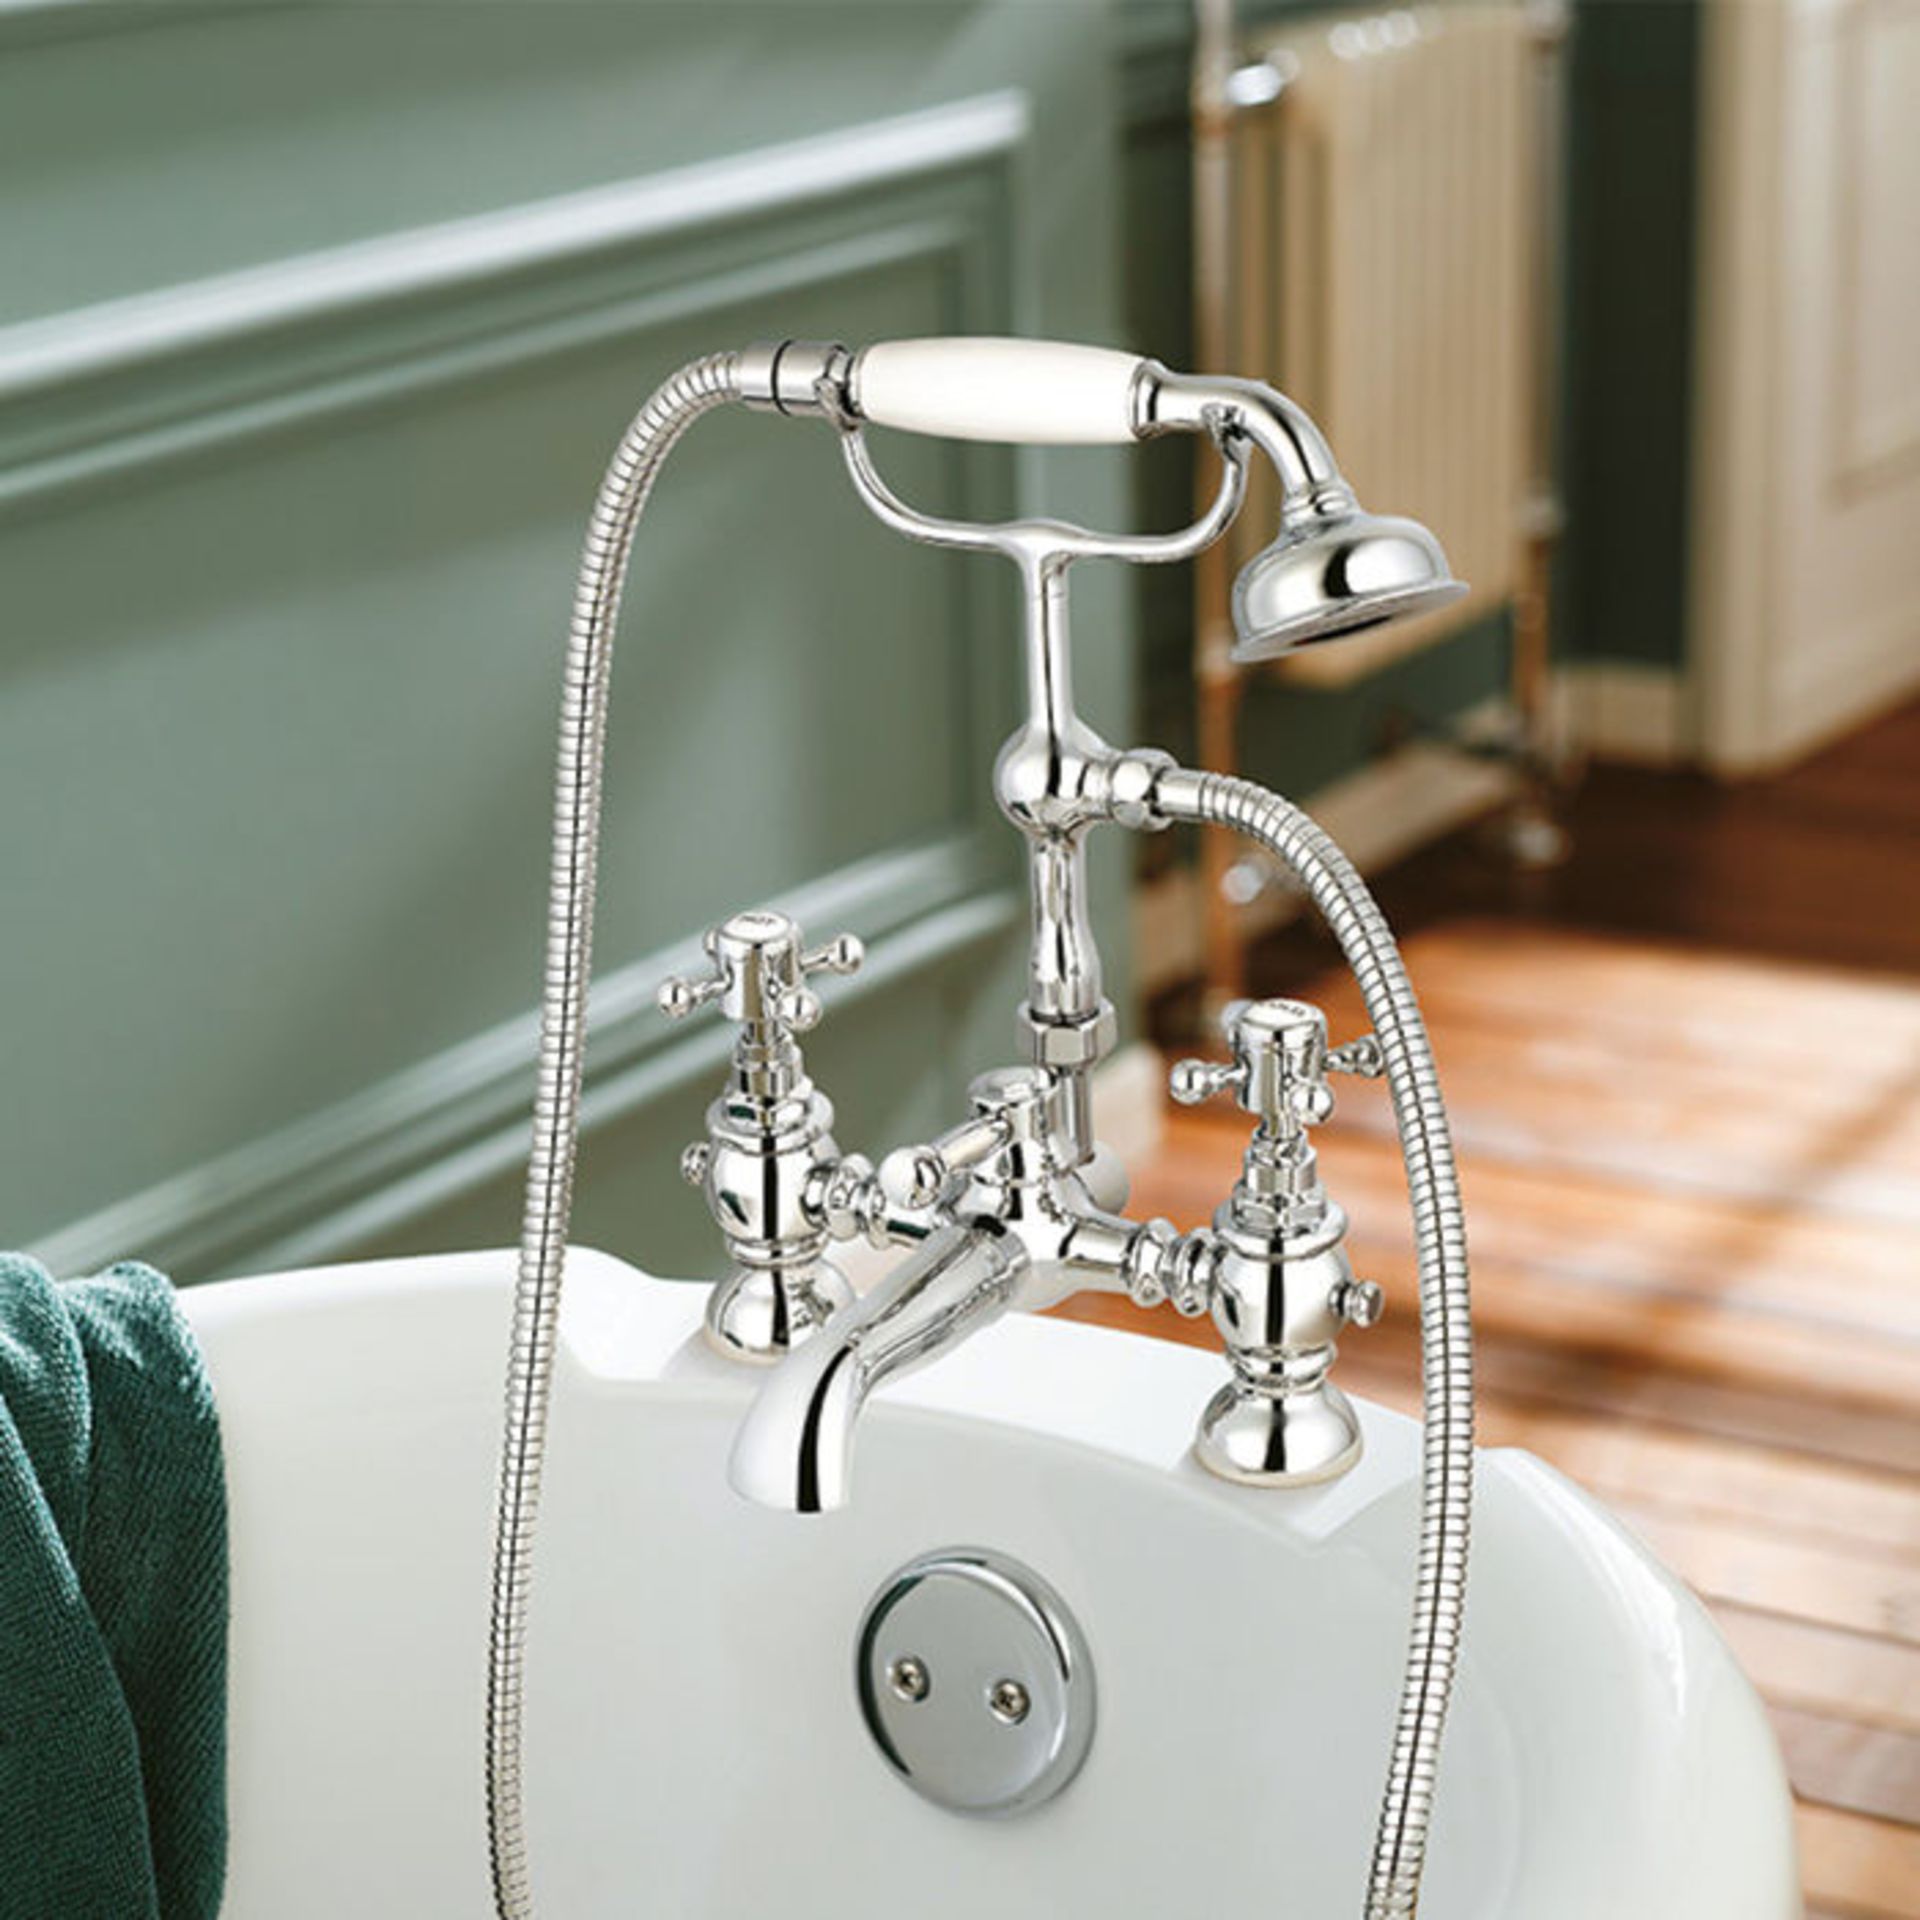 (R1001) Cambridge Bath Shower Mixer - Traditional Tap with Handheld Shower We love this because it